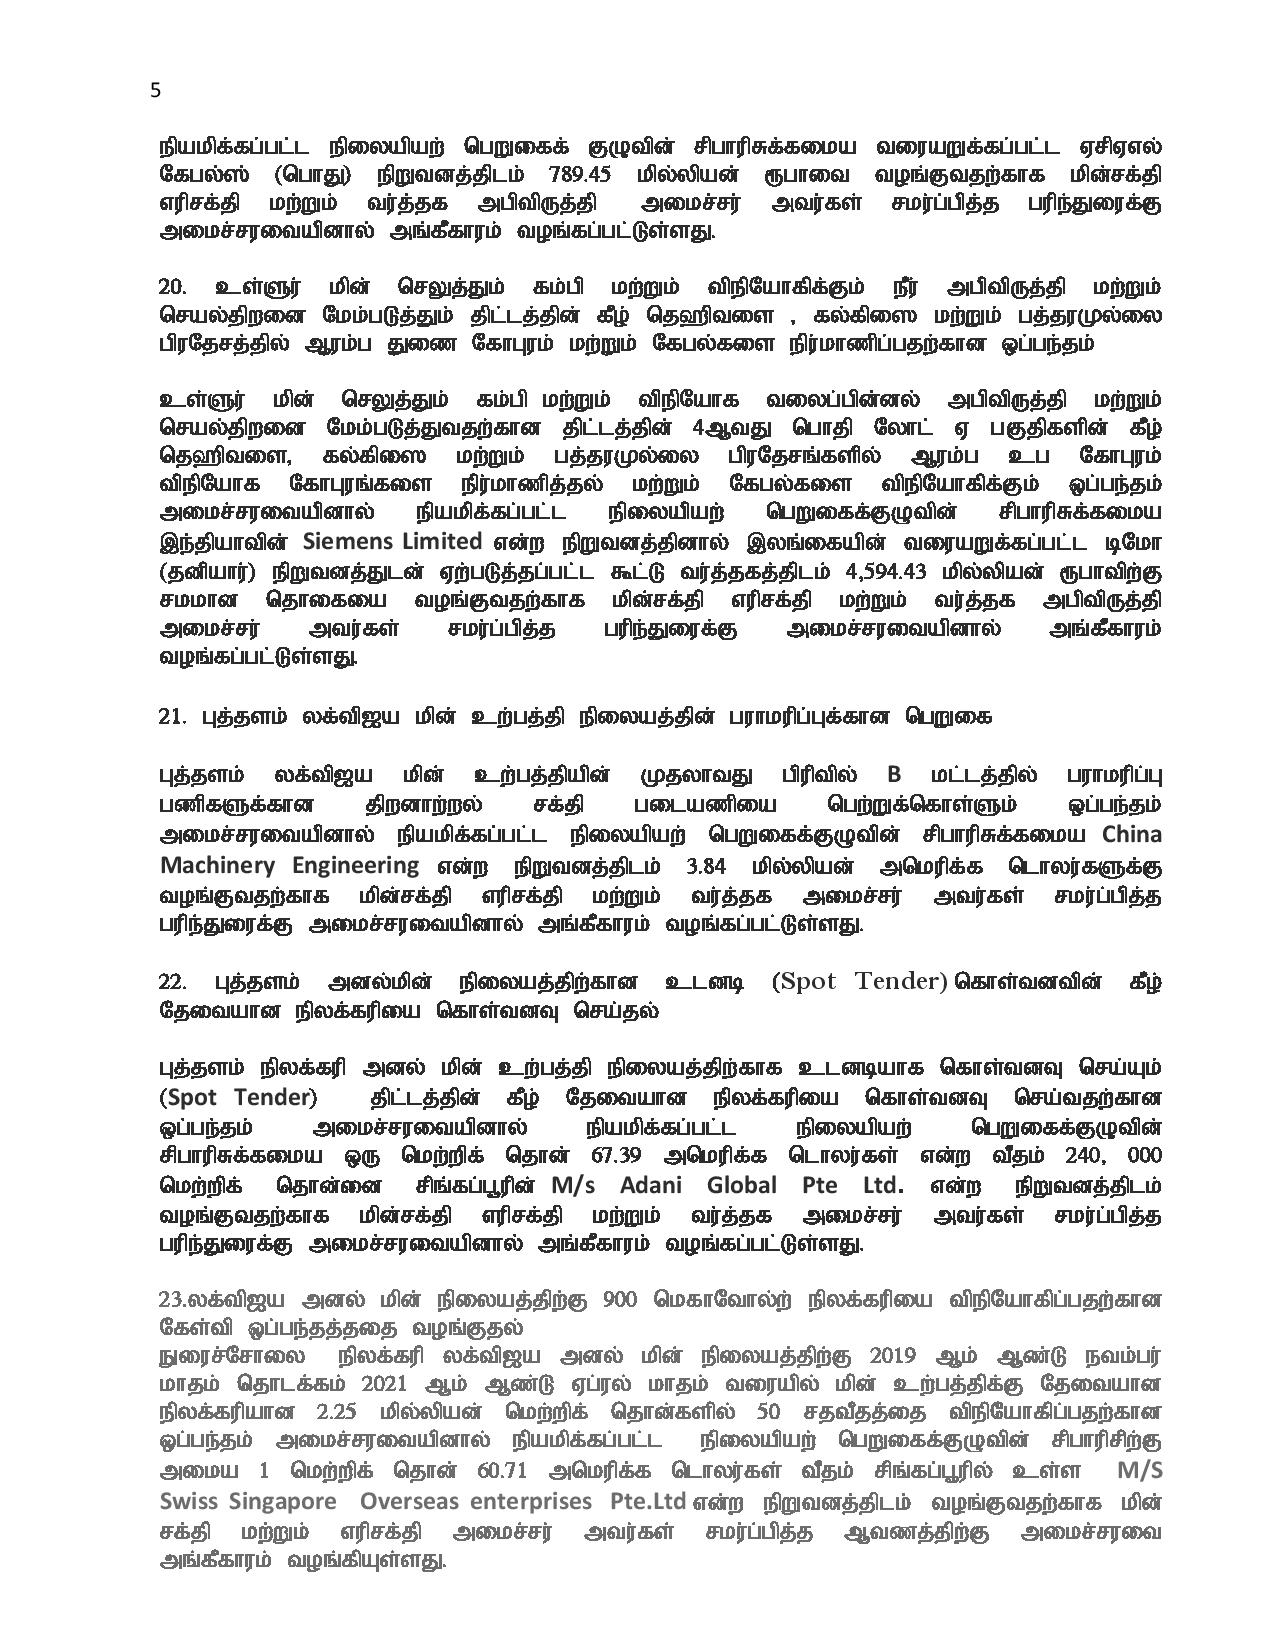 Cabinet Decisions on 05.11.2019 Tamil page 005